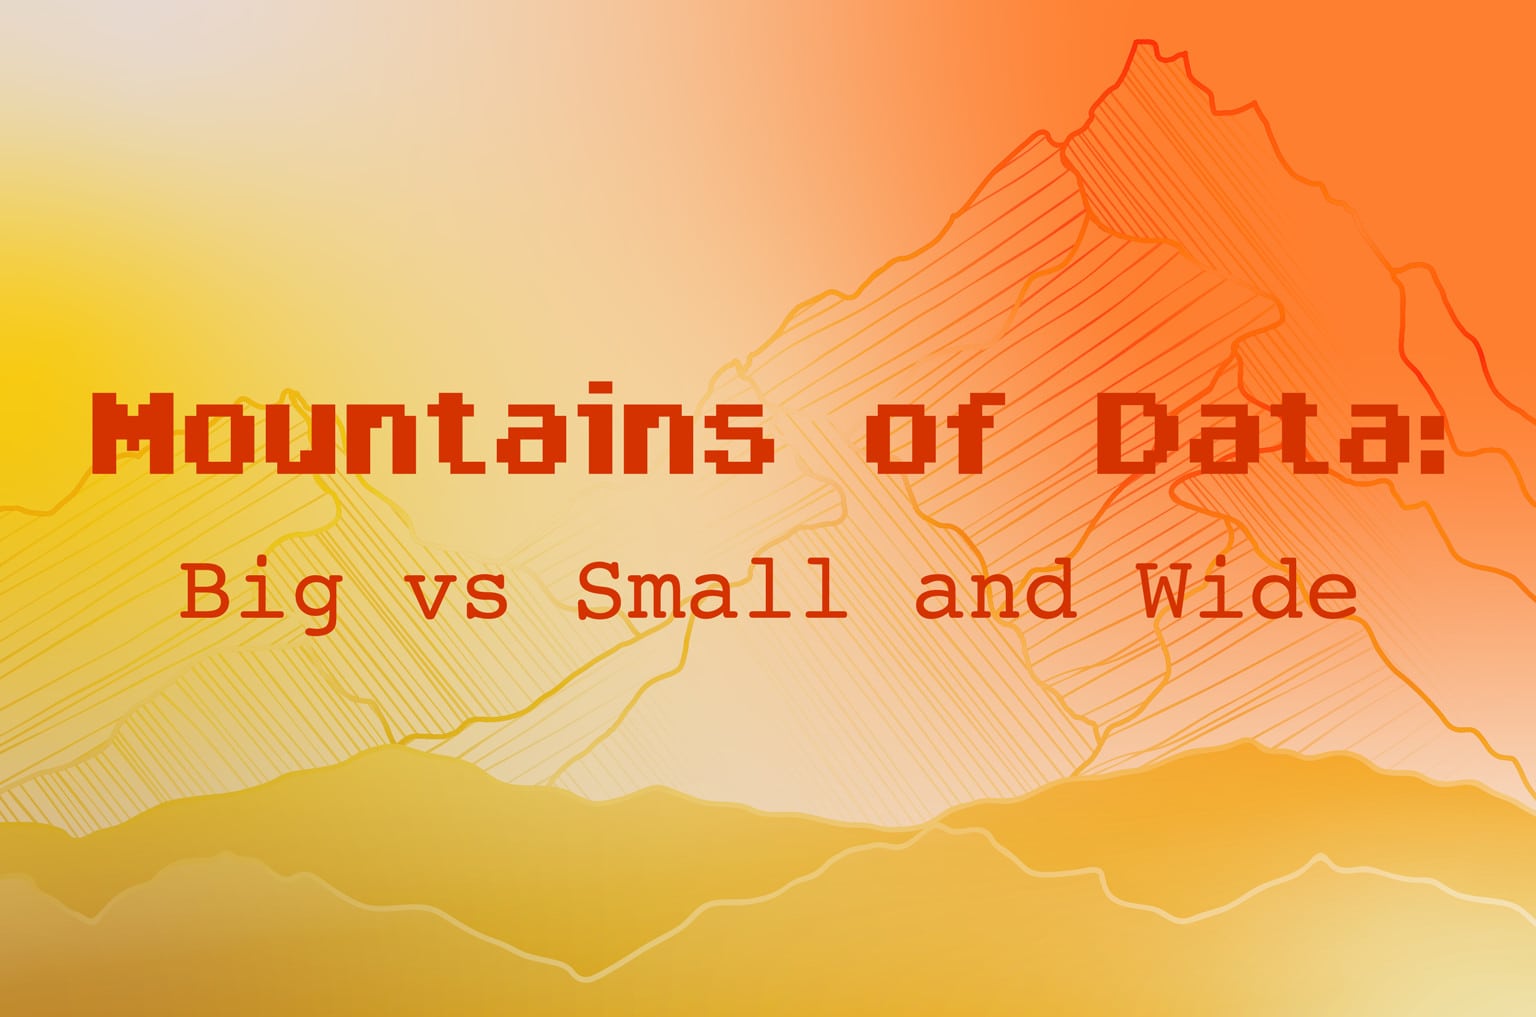 Mountains of Data: Big vs Small and Wide